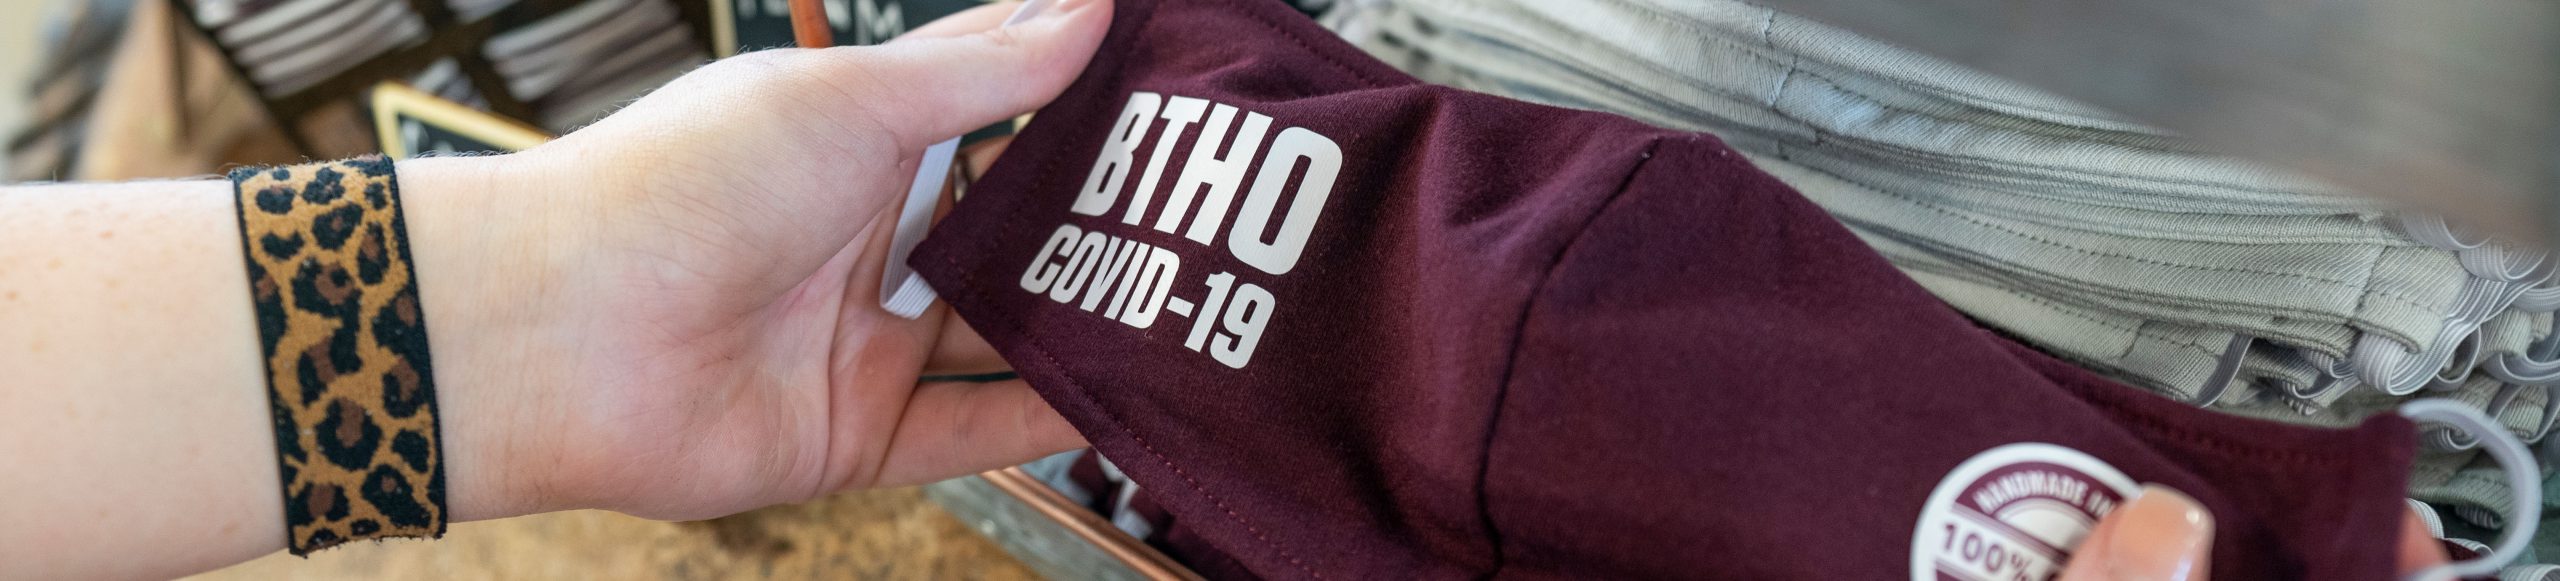 close up of hand holding mask that says BTHO COVID-19